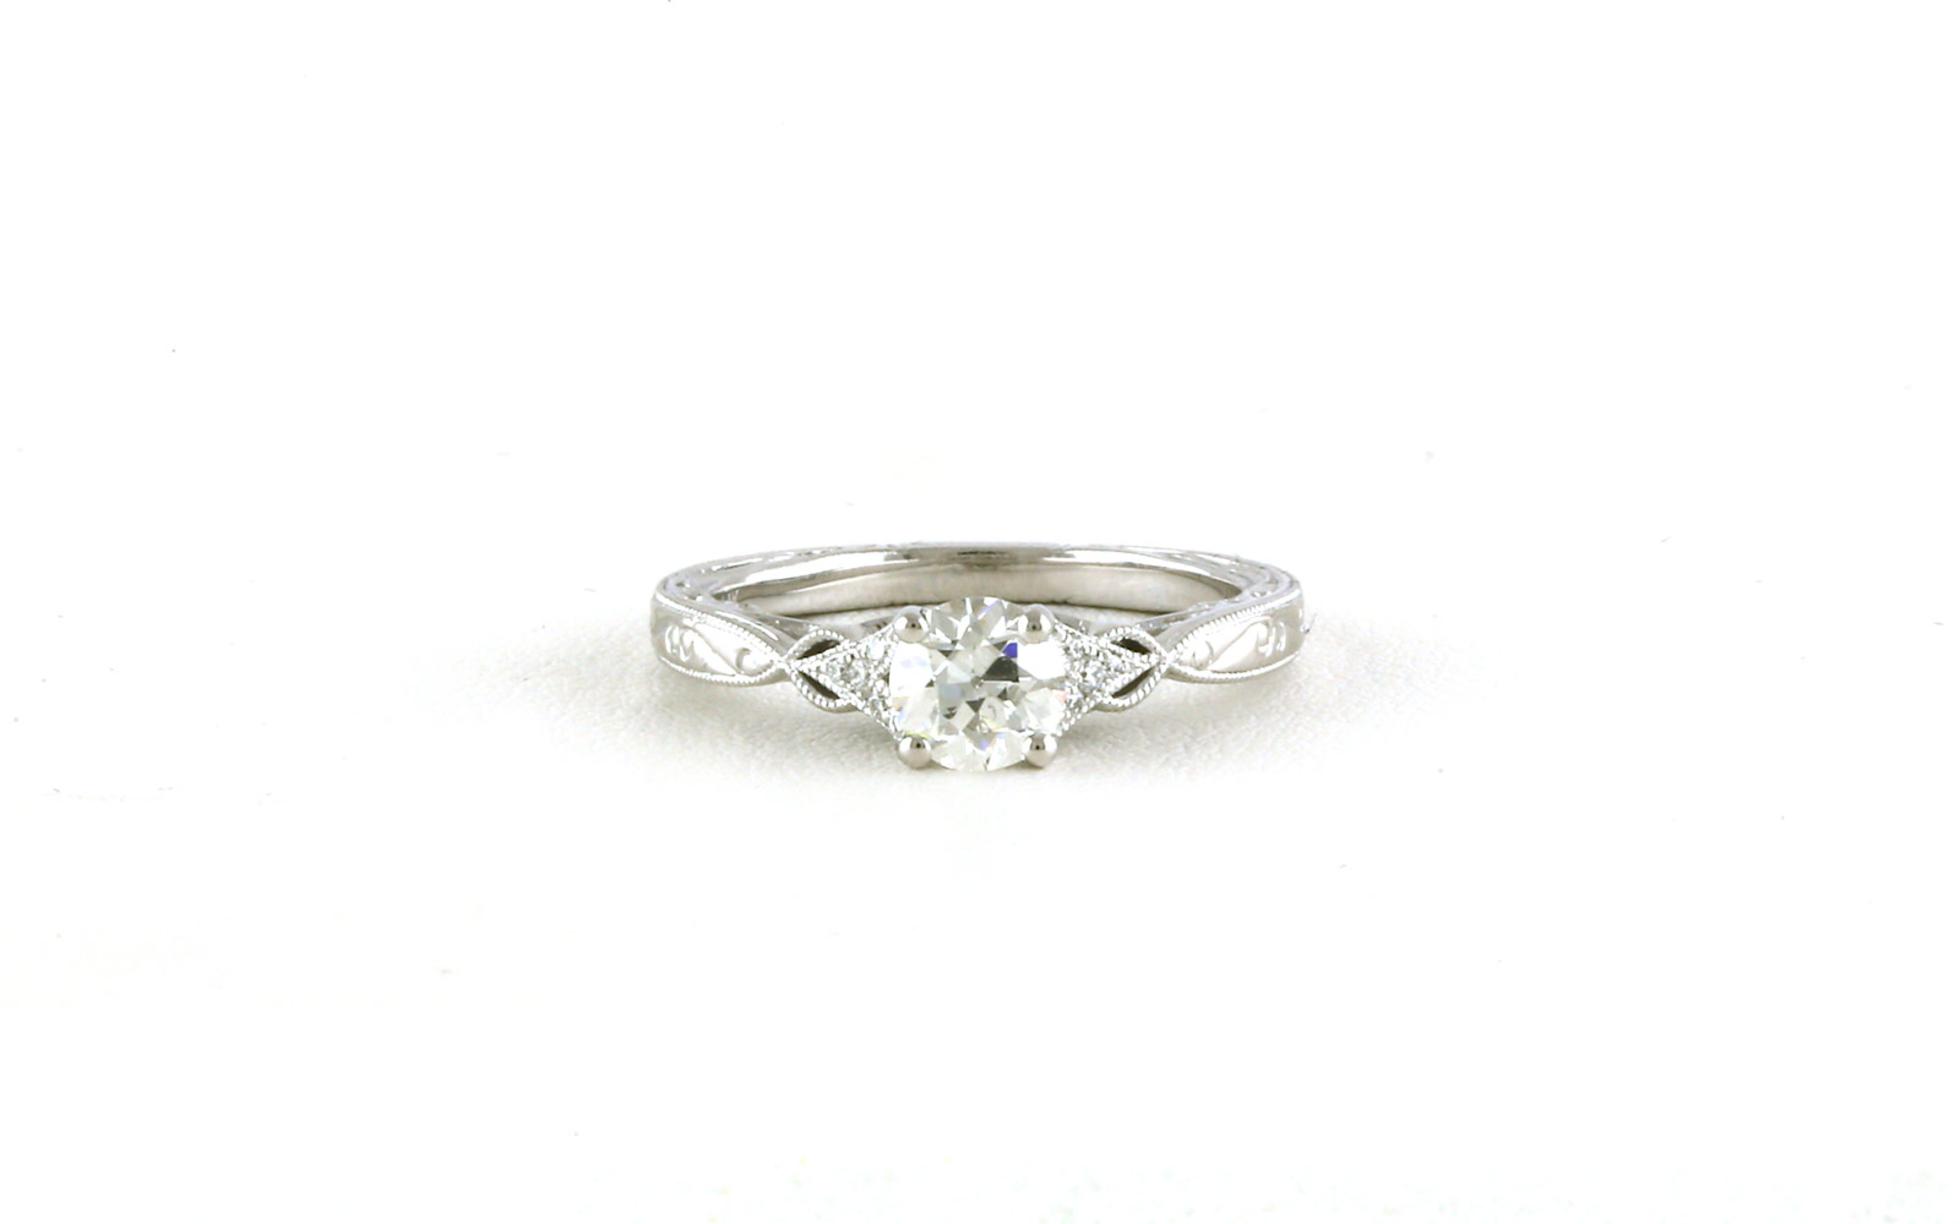 Antique-style Diamond Engagement Ring with Engraved Details in White Gold (0.63cts TWT)